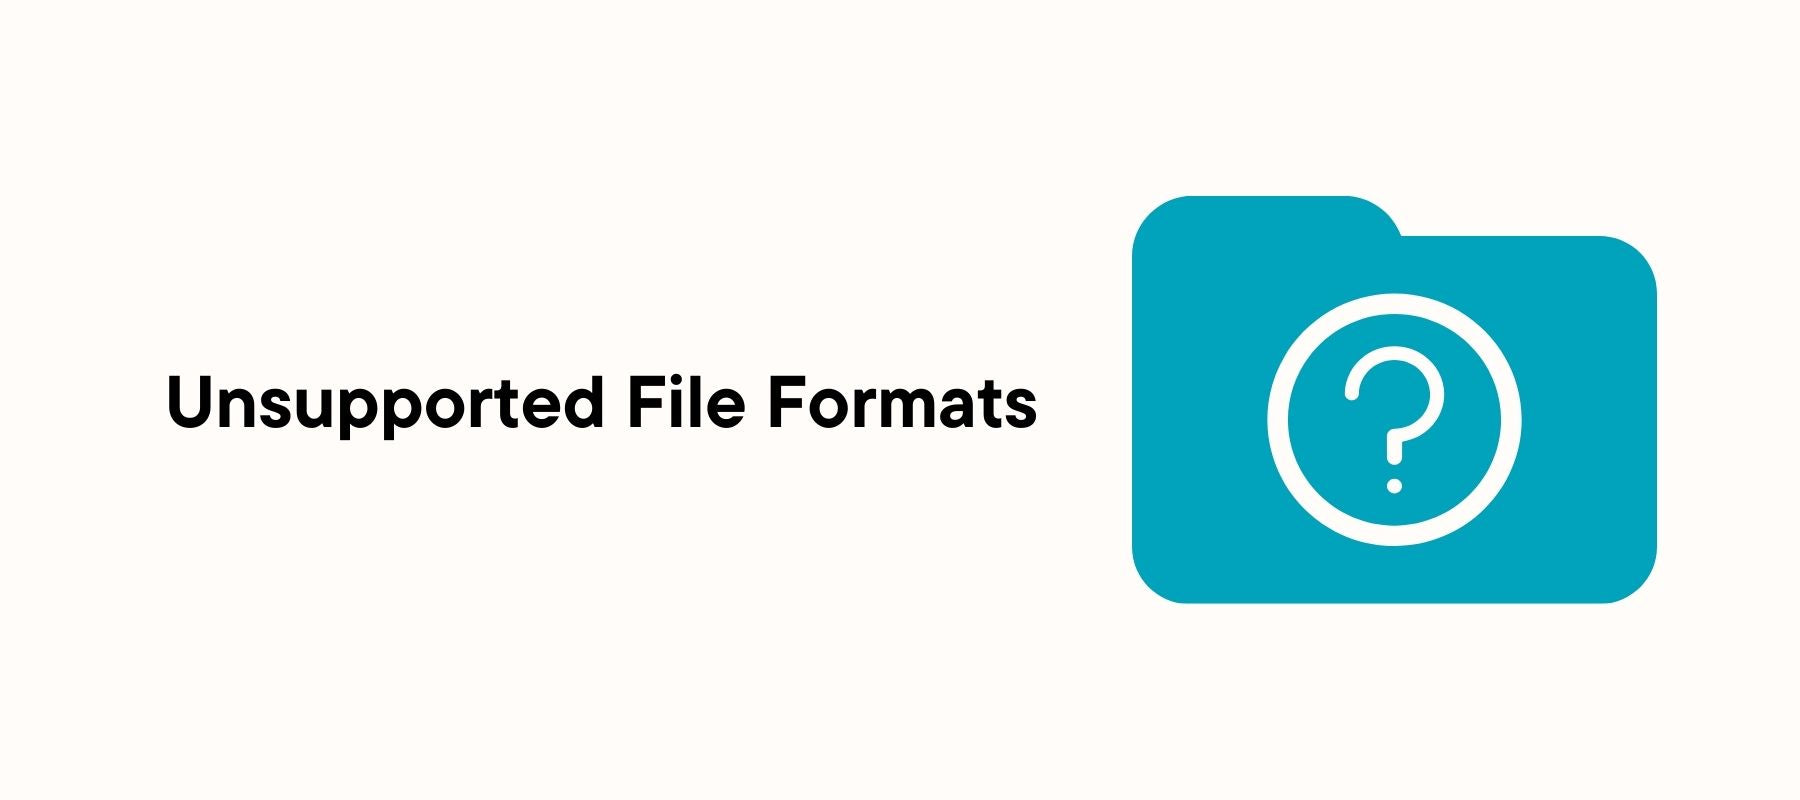 Unsupported File Formats